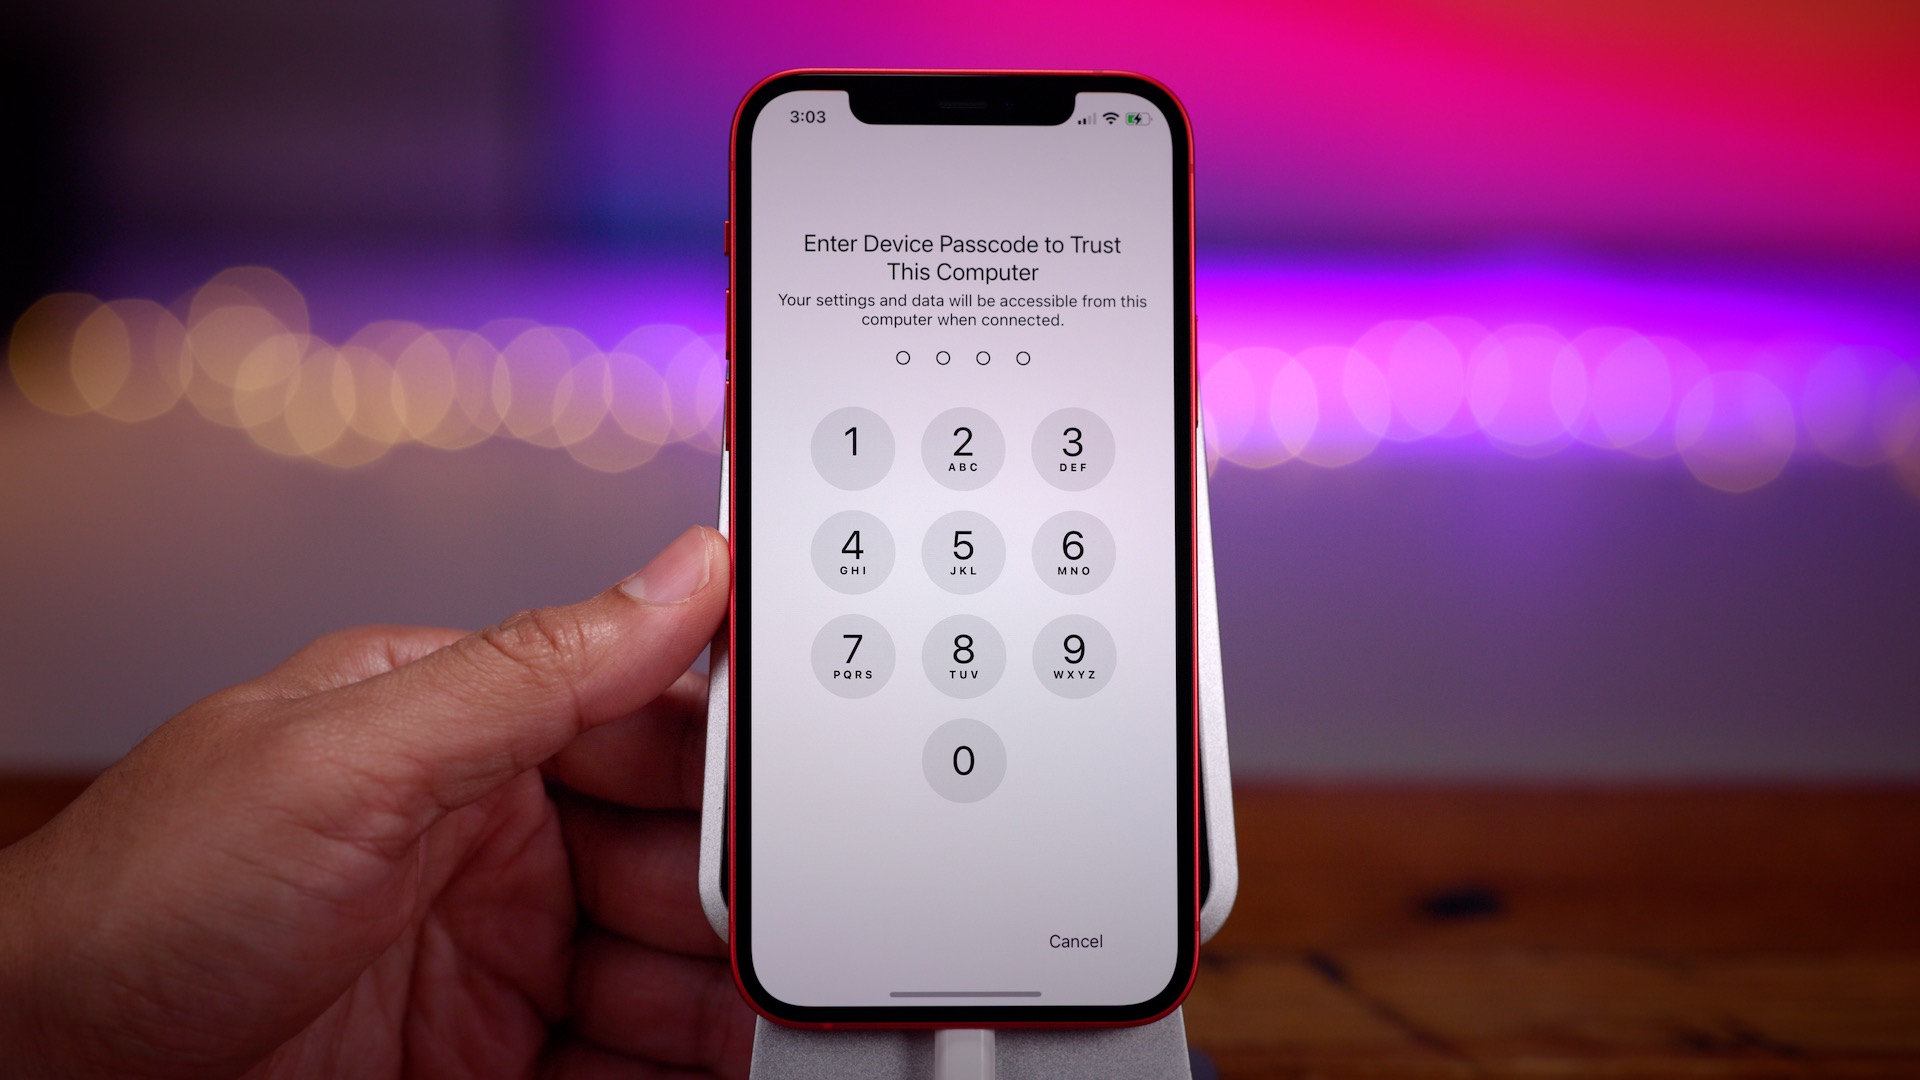 How-to: force restart iPhone 12, enter recovery mode, DFU mode, and